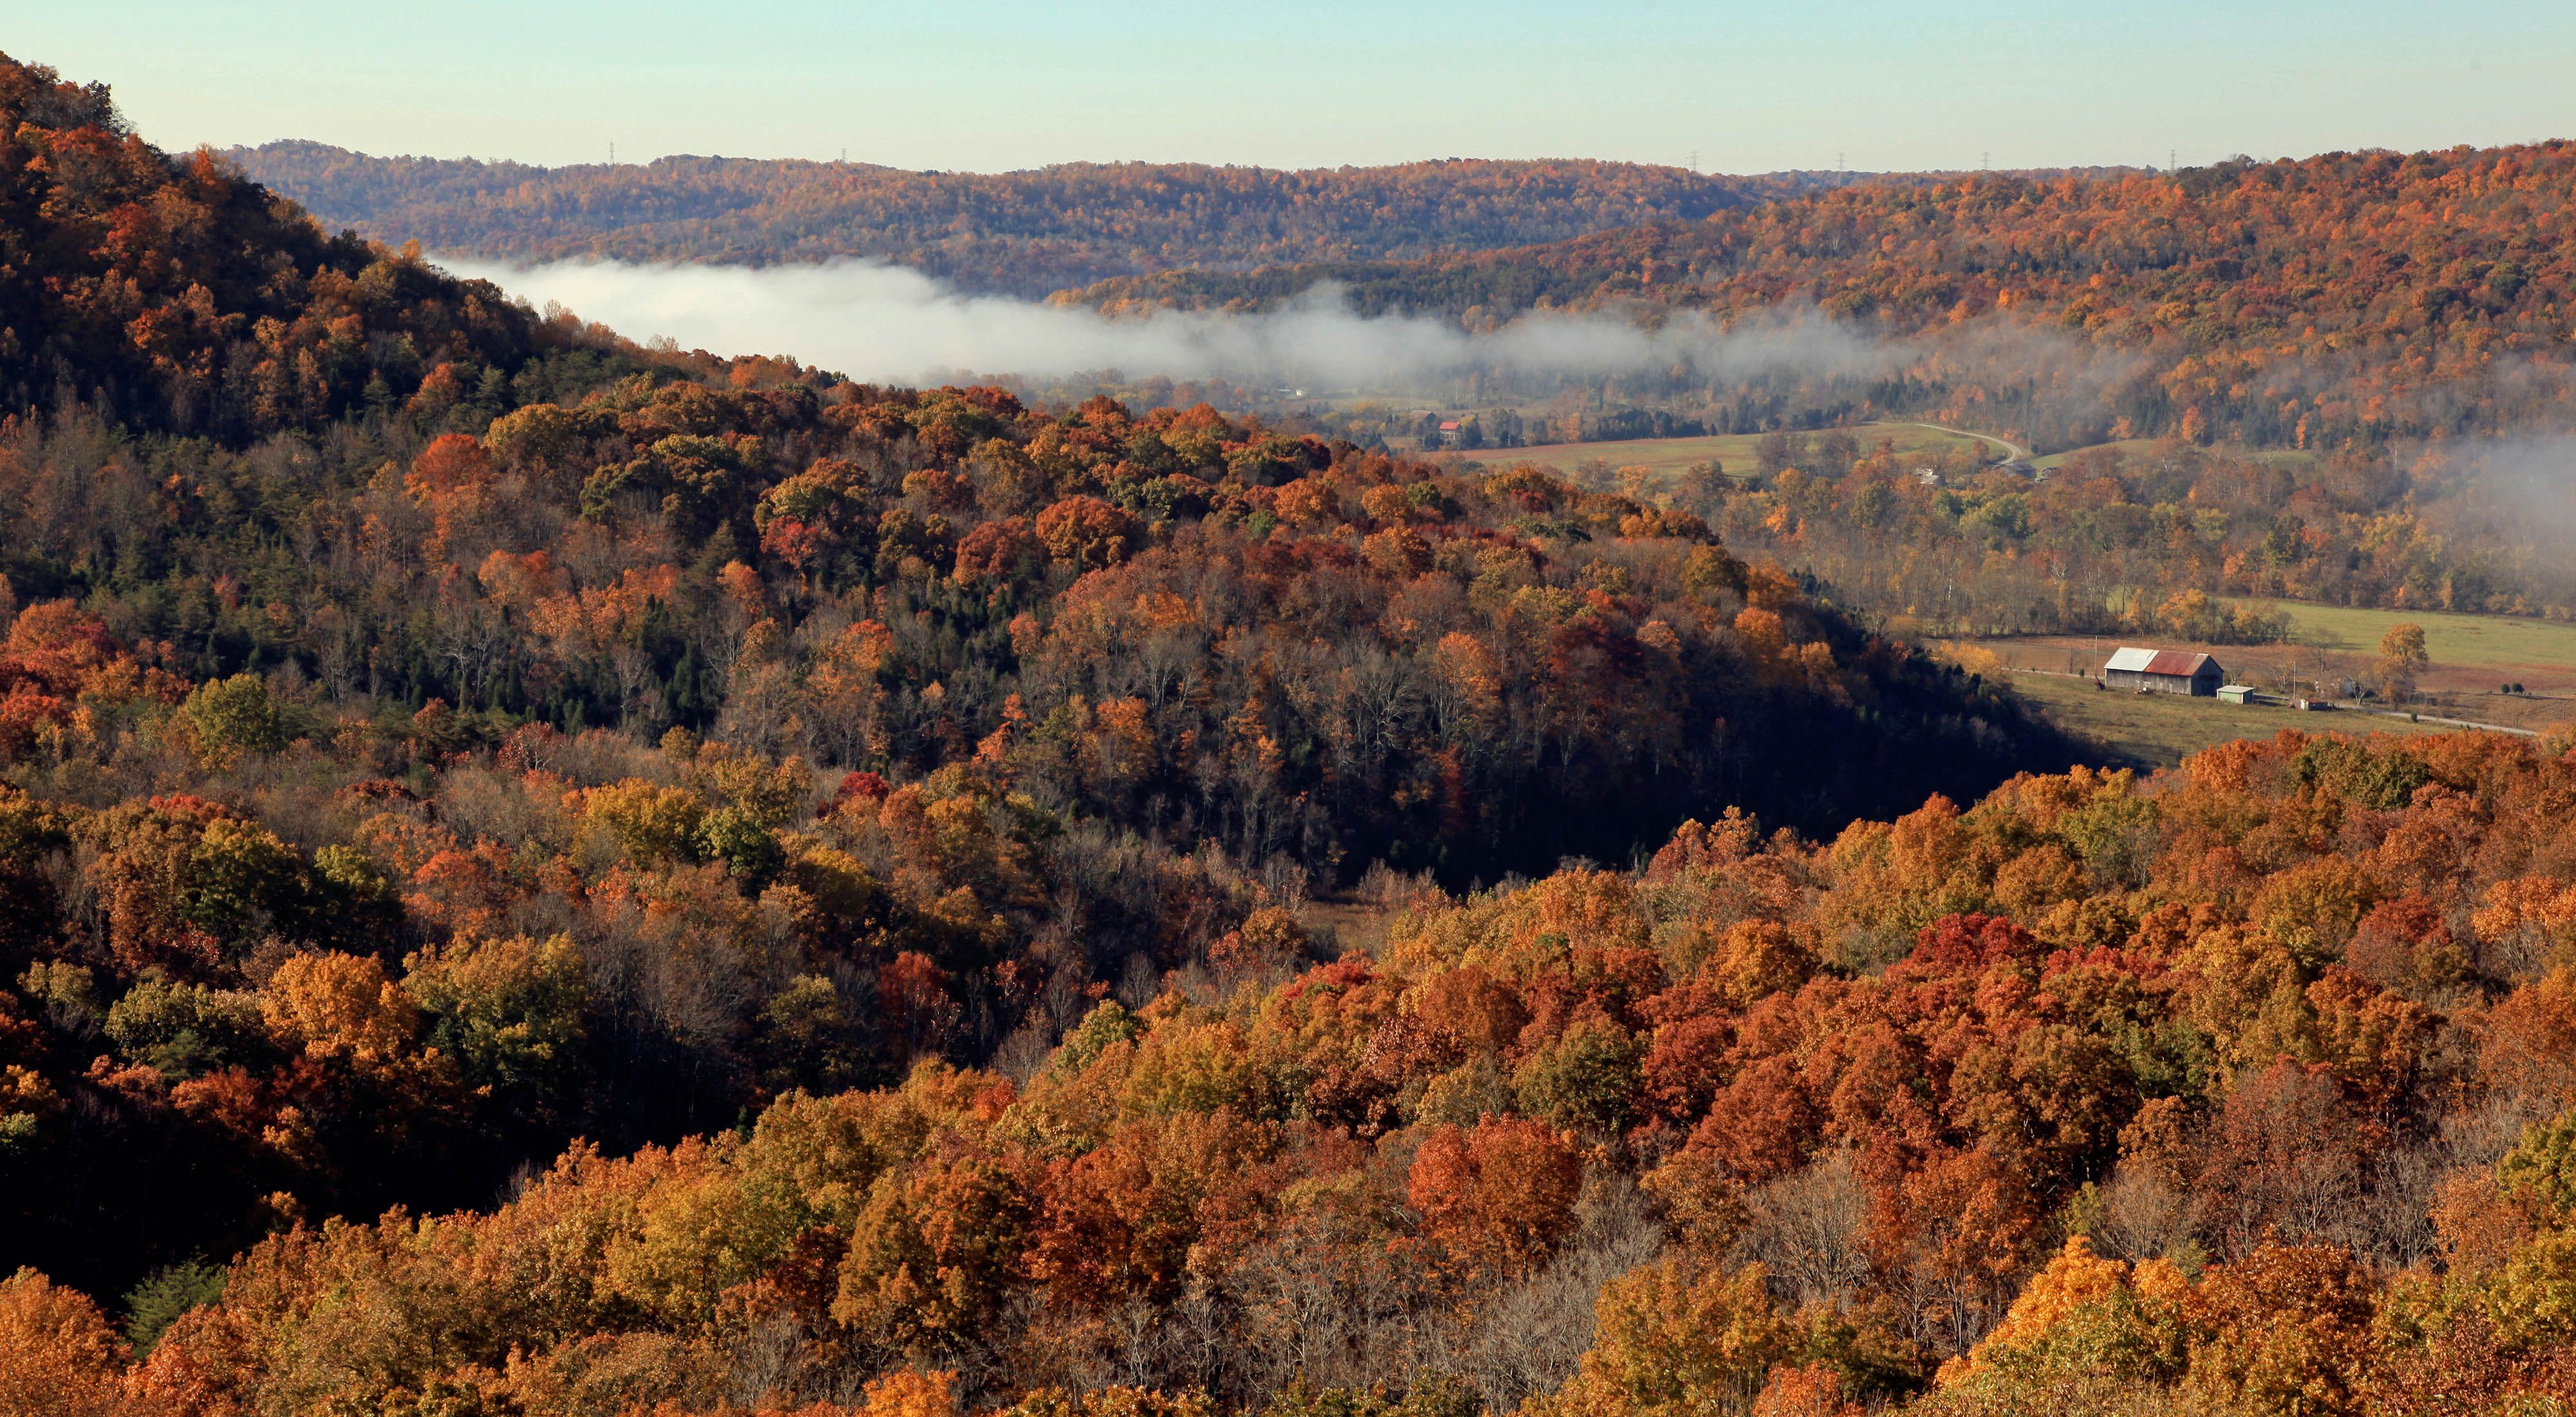 Misty hillsides with fall colors.